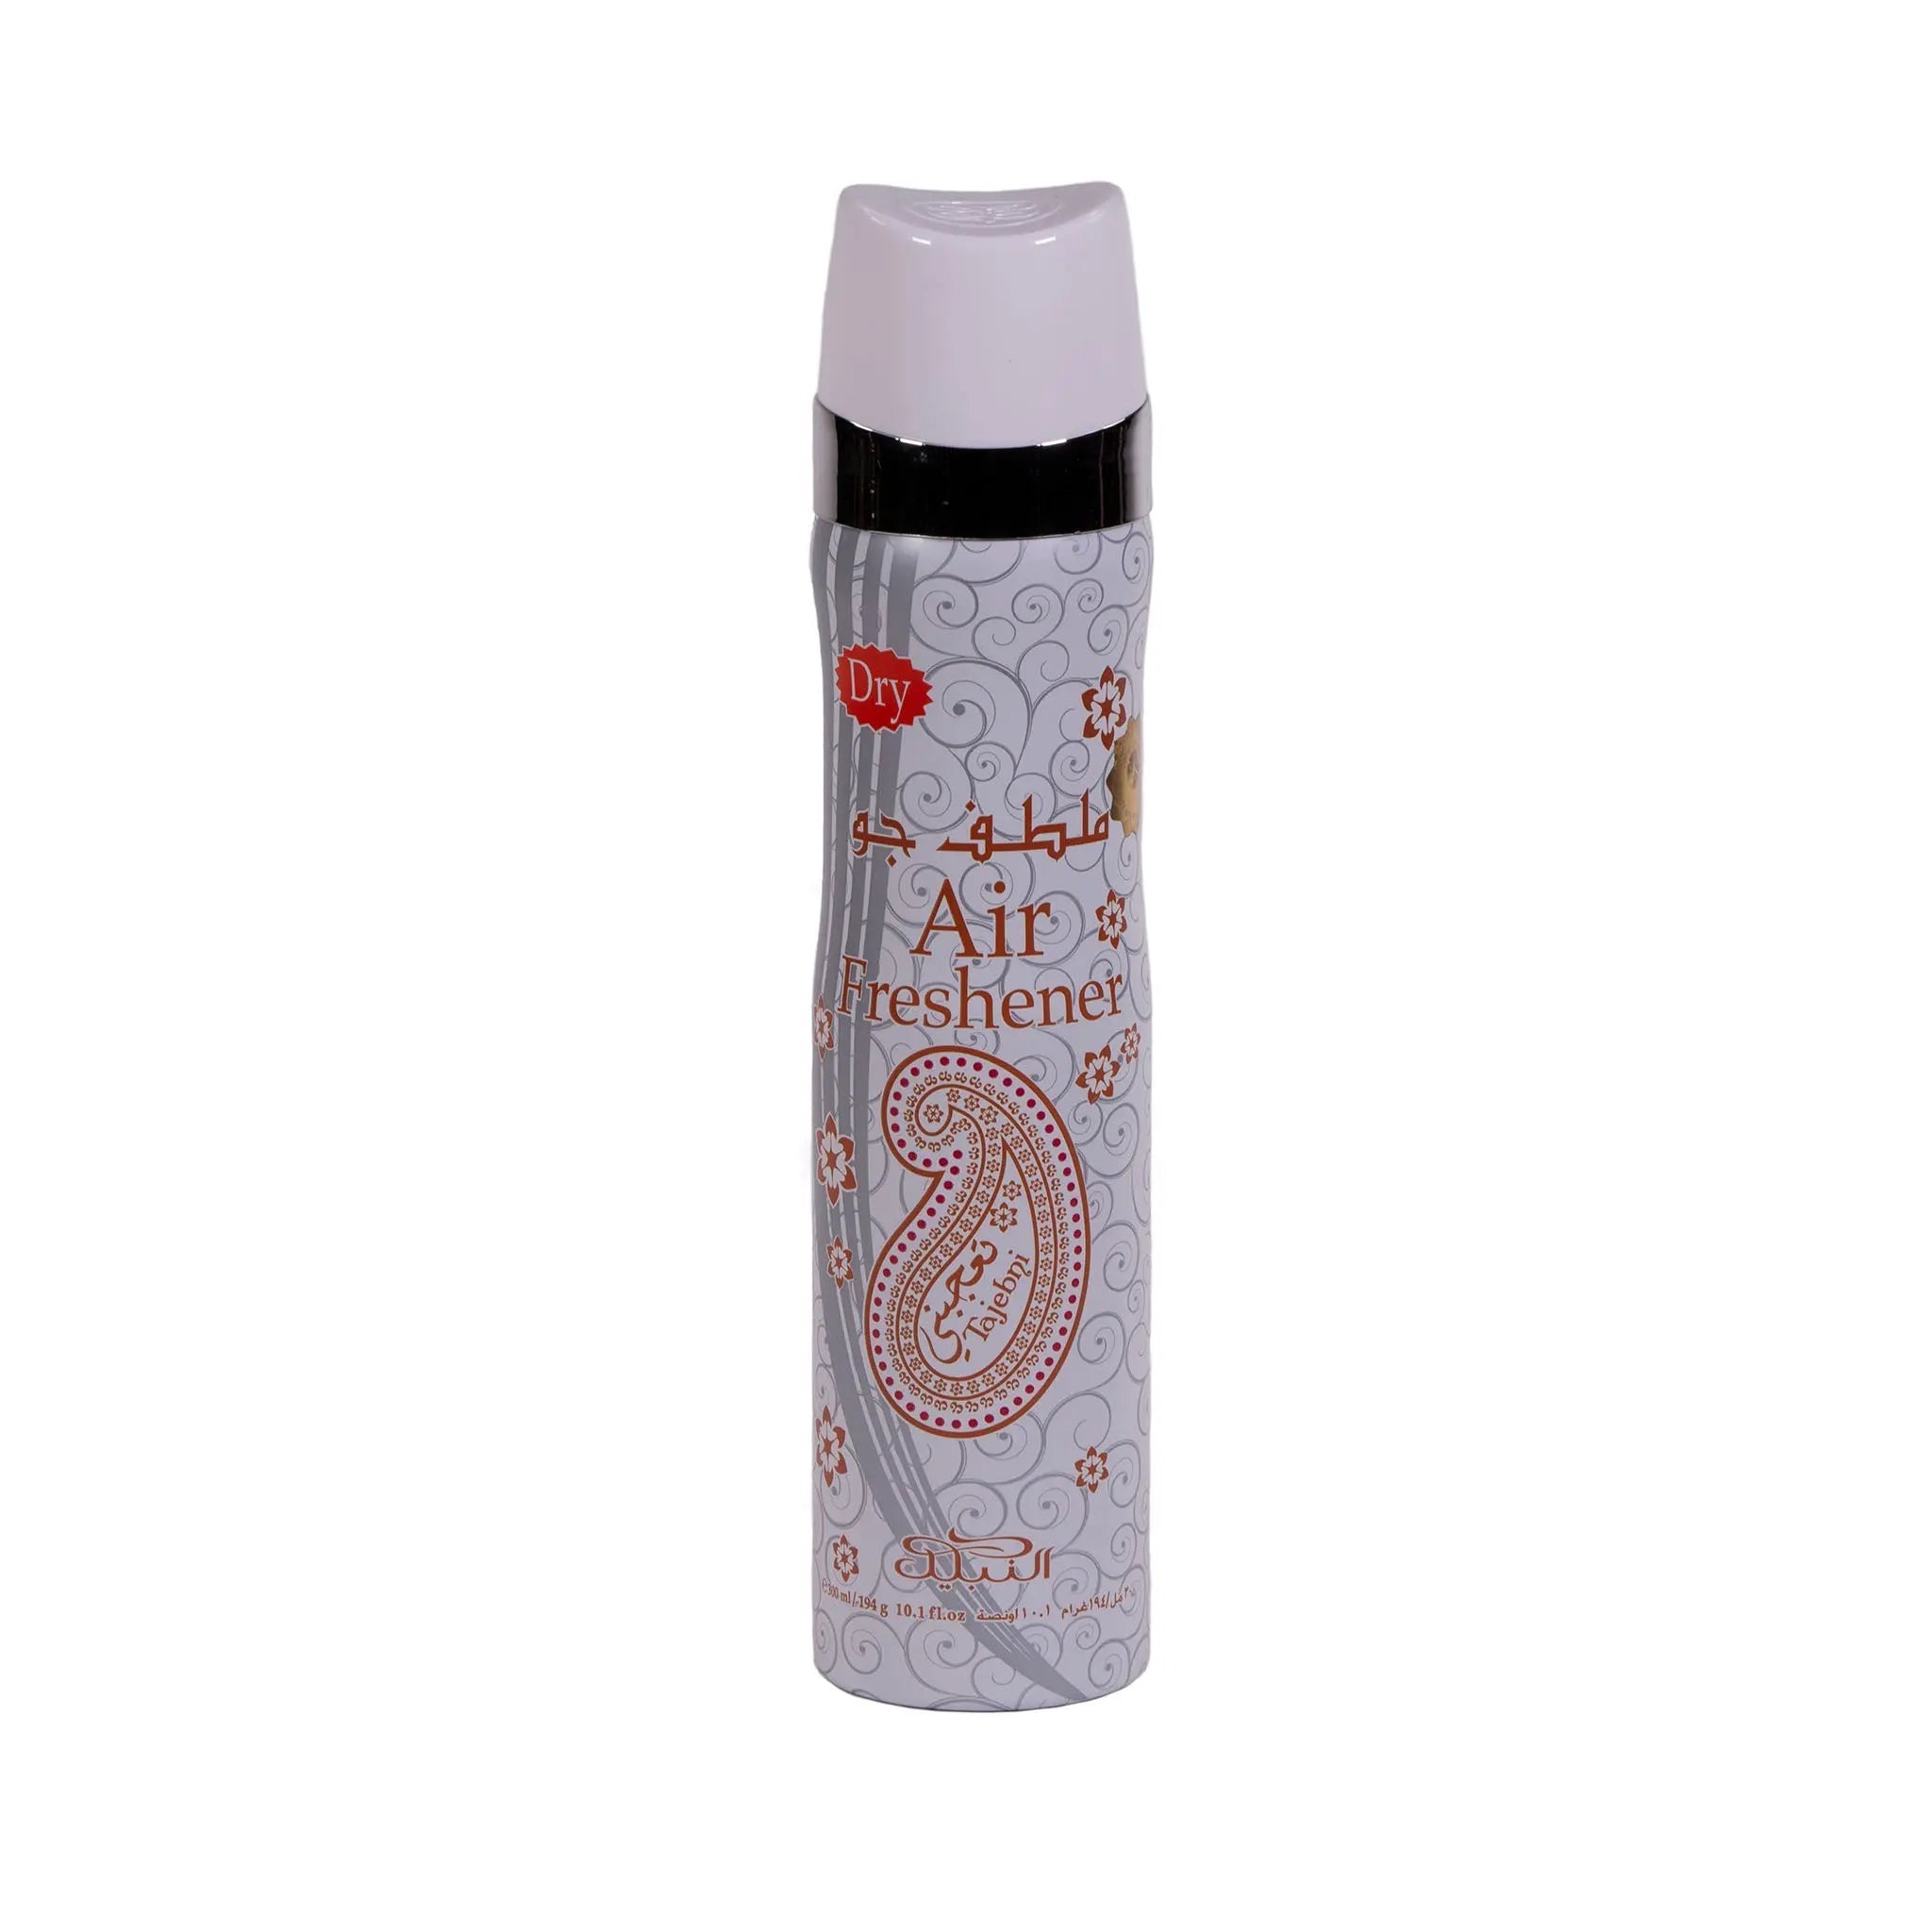 The image shows a "Tajebni" air freshener can. The body of the can is white with a grey paisley design and red floral patterns. It has "Air Freshener" written in both Arabic and English, with a "Dry" label at the top. The cap is white, matching the can's body. The brand "nabeel" is printed at the bottom in a decorative script. The overall design of the can gives off a clean and possibly floral scent impression.